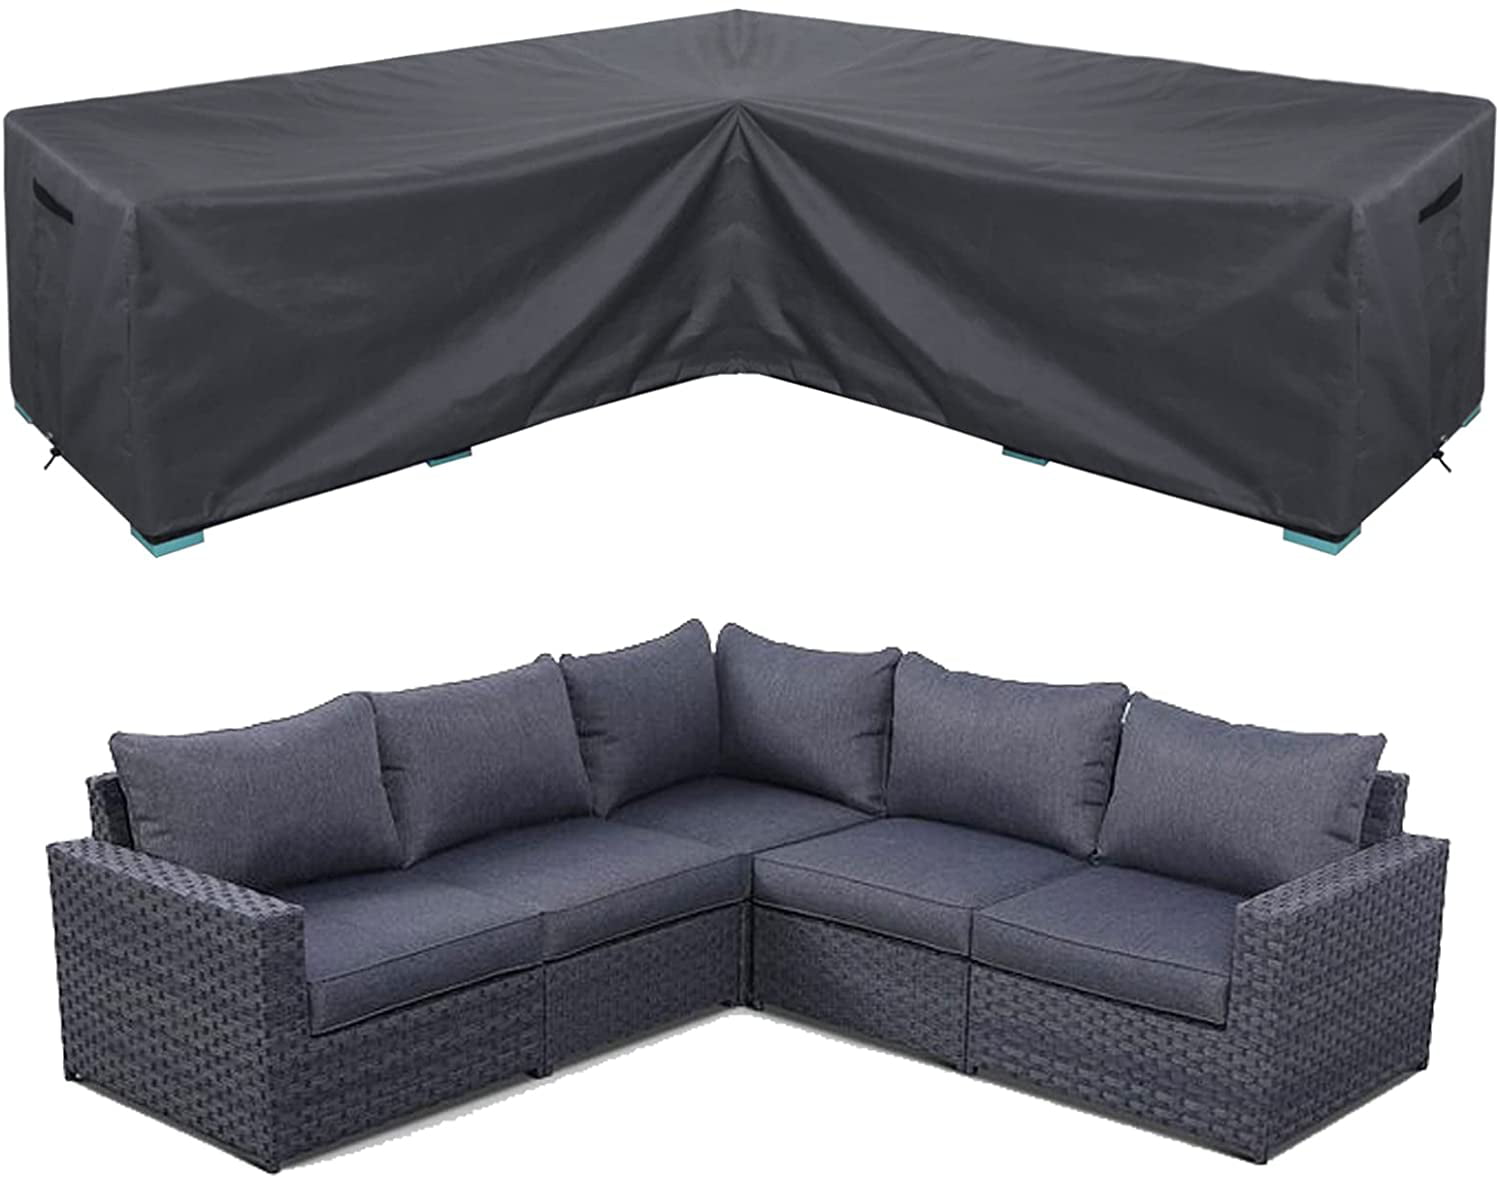 Patio Rattan Corner Sofa Furniture Covers UCARE Waterproof 210D Oxford V Shaped Garden Furniture Sectional Couch Protector Cover for Outdoor Indoor Veranda 215x215cm/ 84x84in